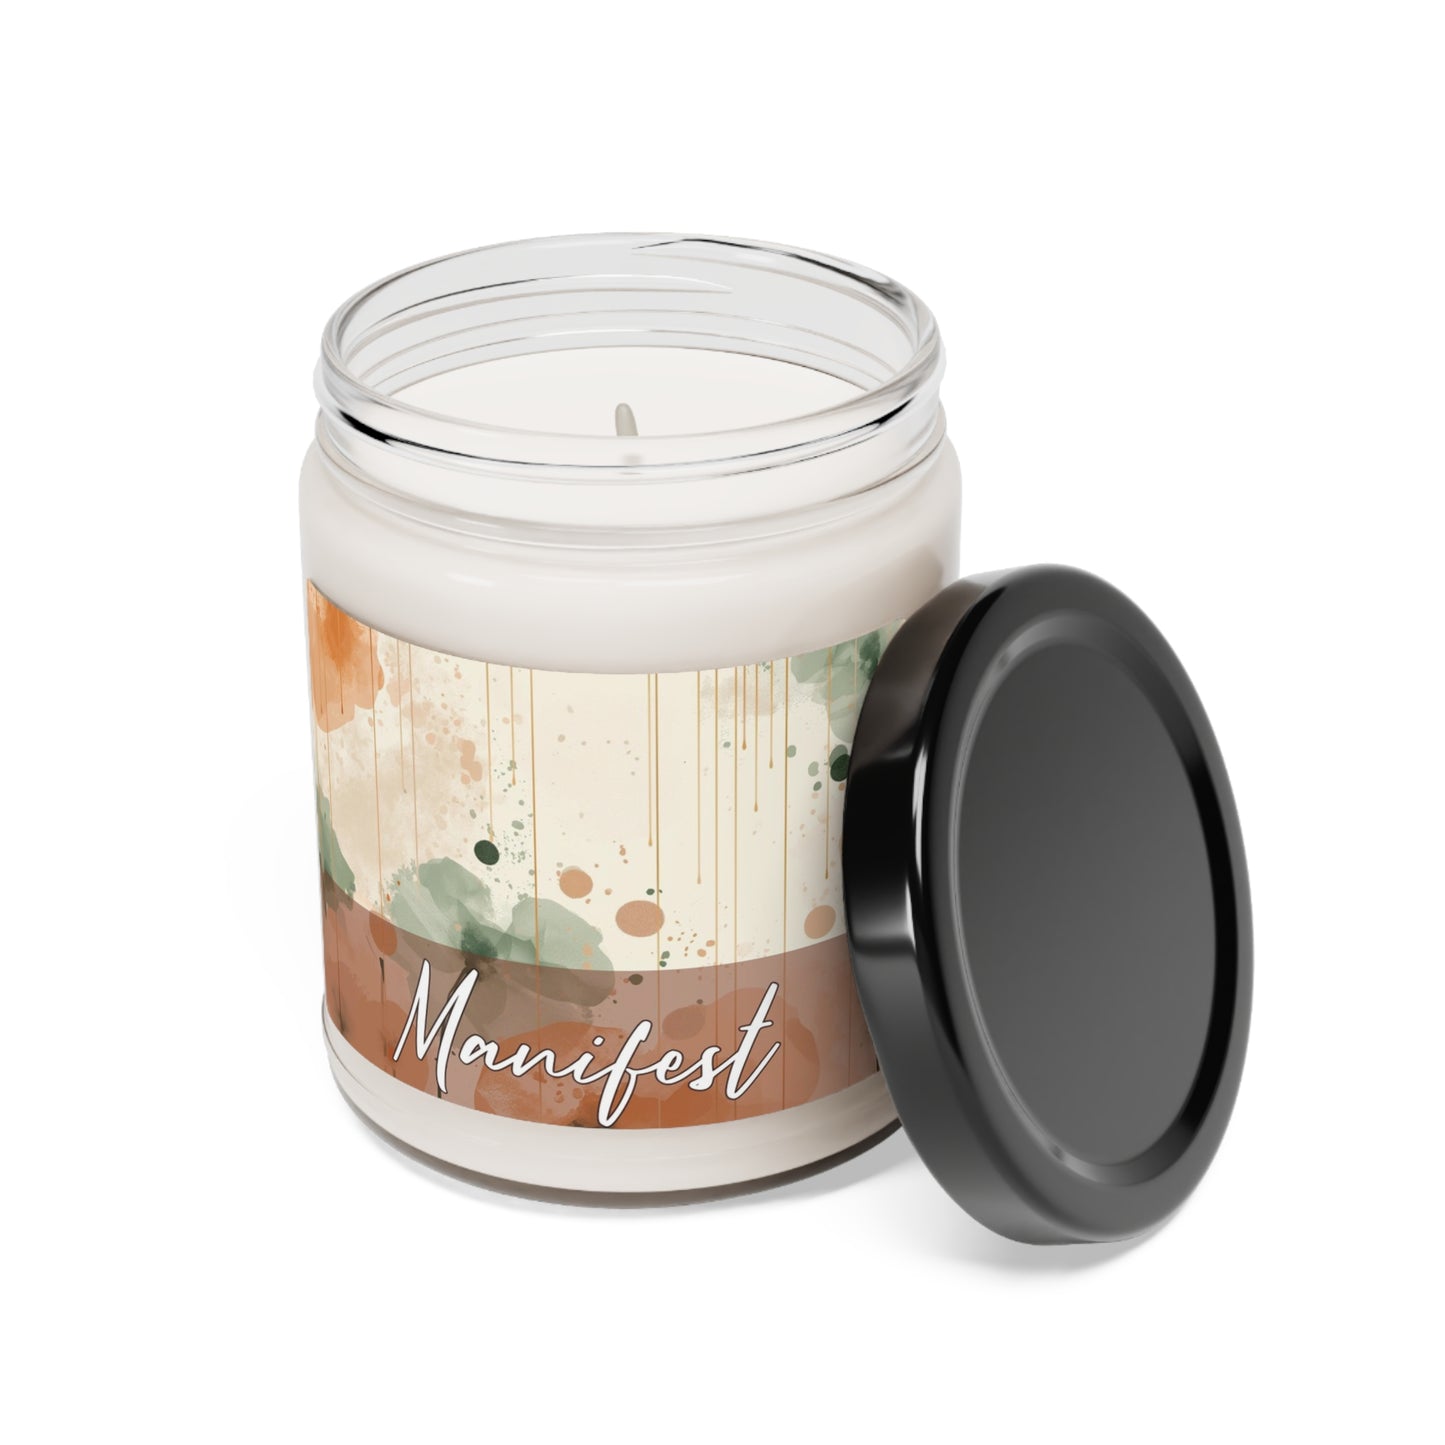 'Manifest' Scented Soy Candle, 9oz